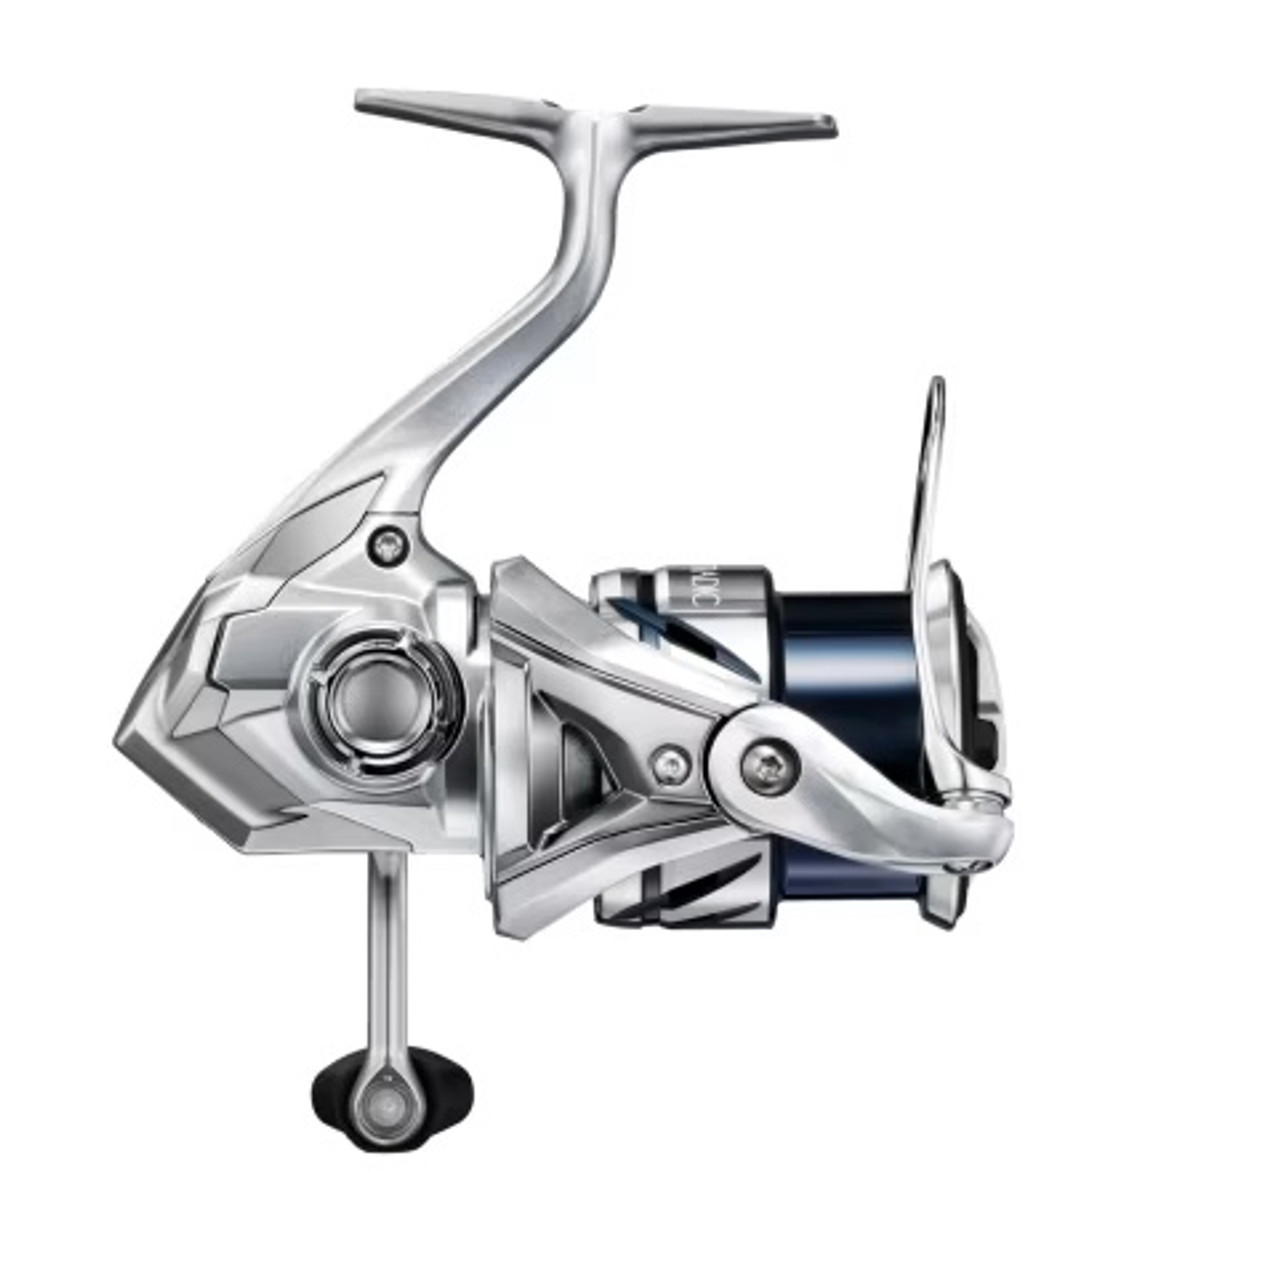 Shimano Reels for sale in Munsey Park, New York